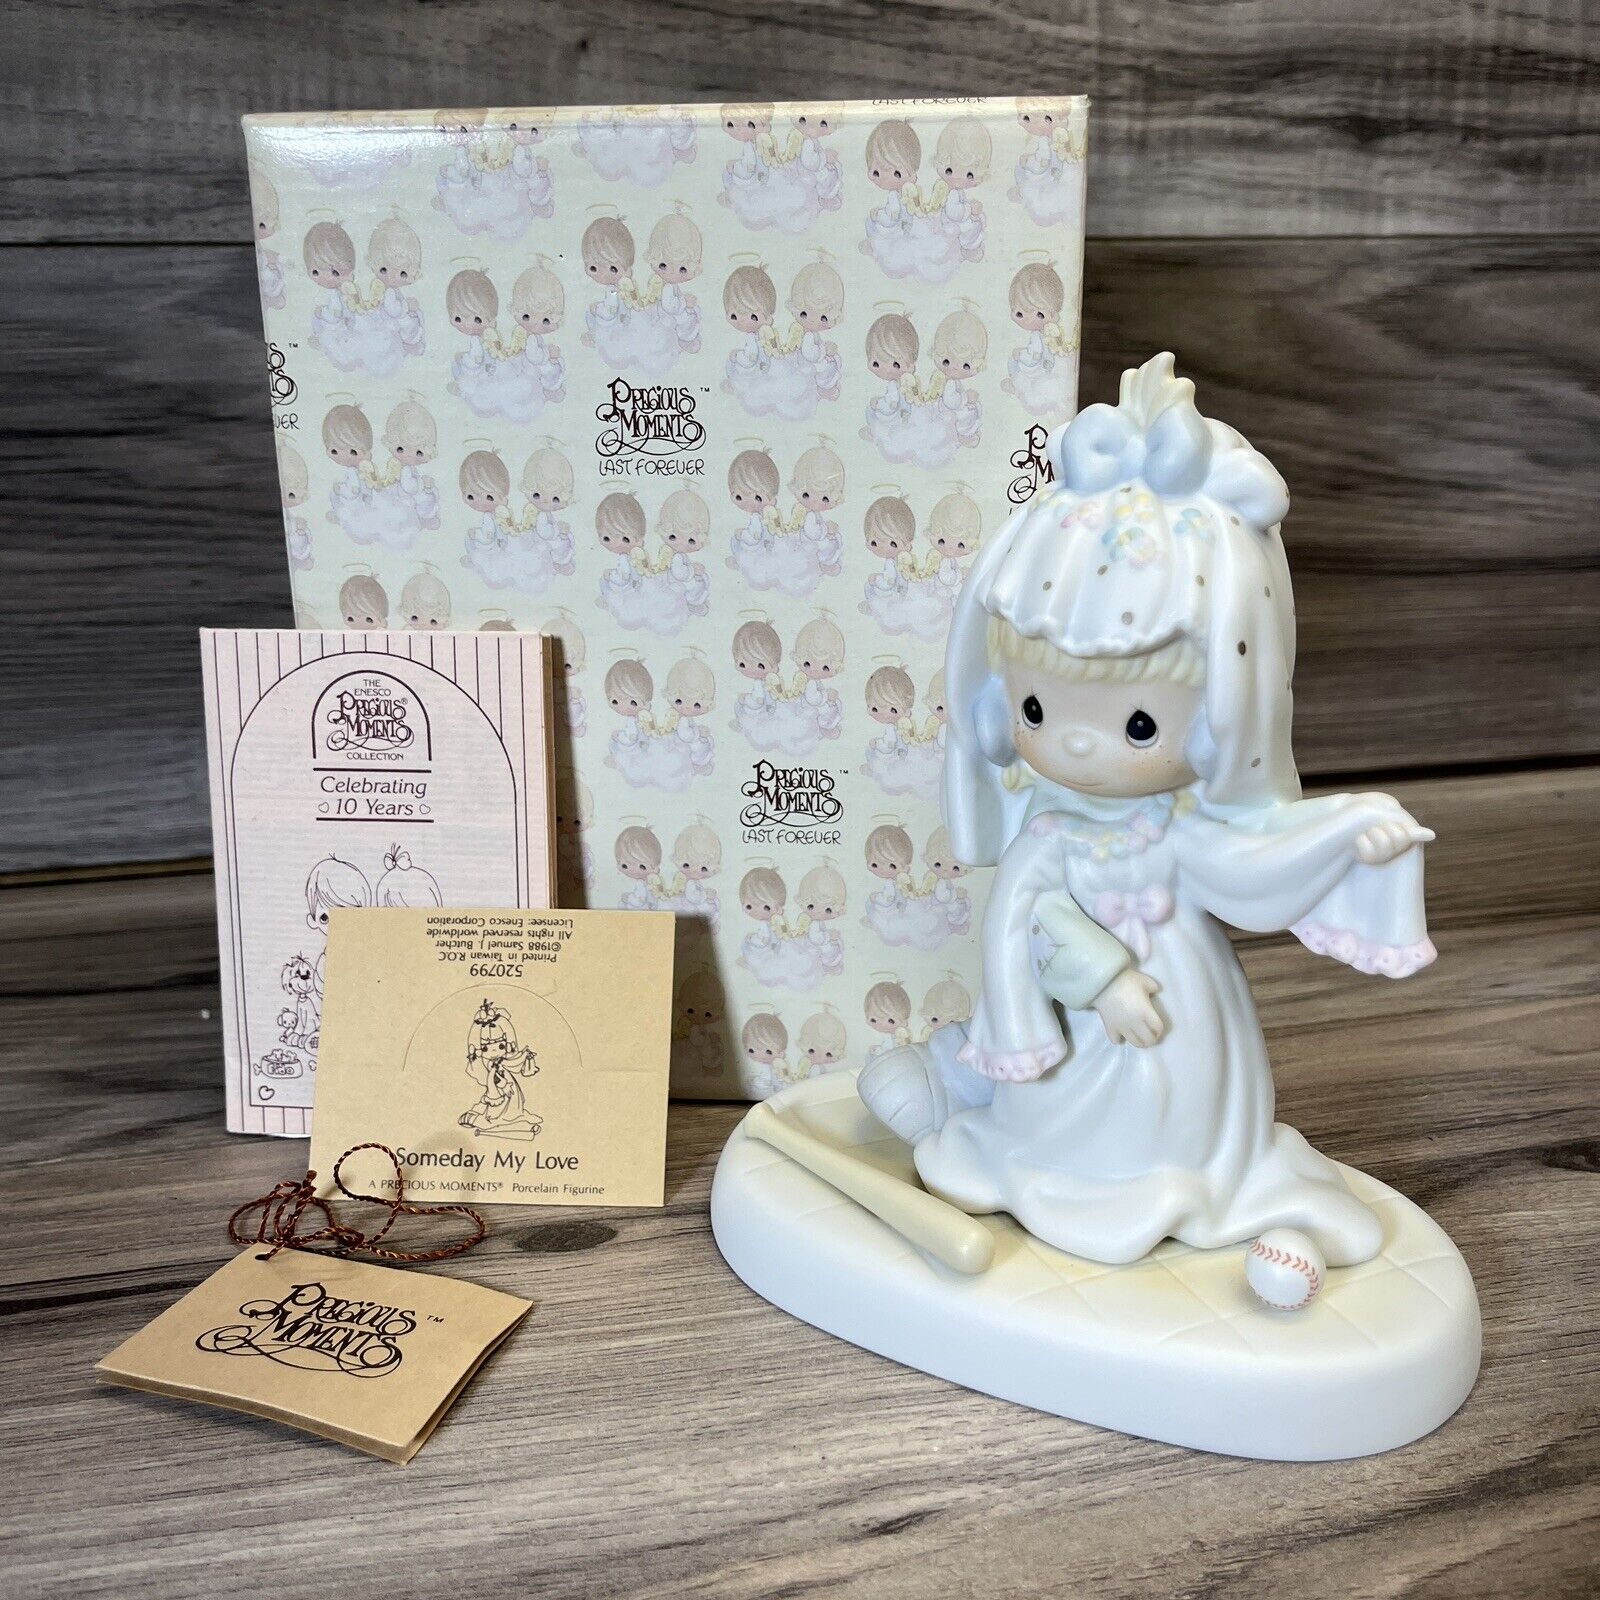 Precious Moments 520799  “Someday My Love” Figurine 1988 With Box And Cards